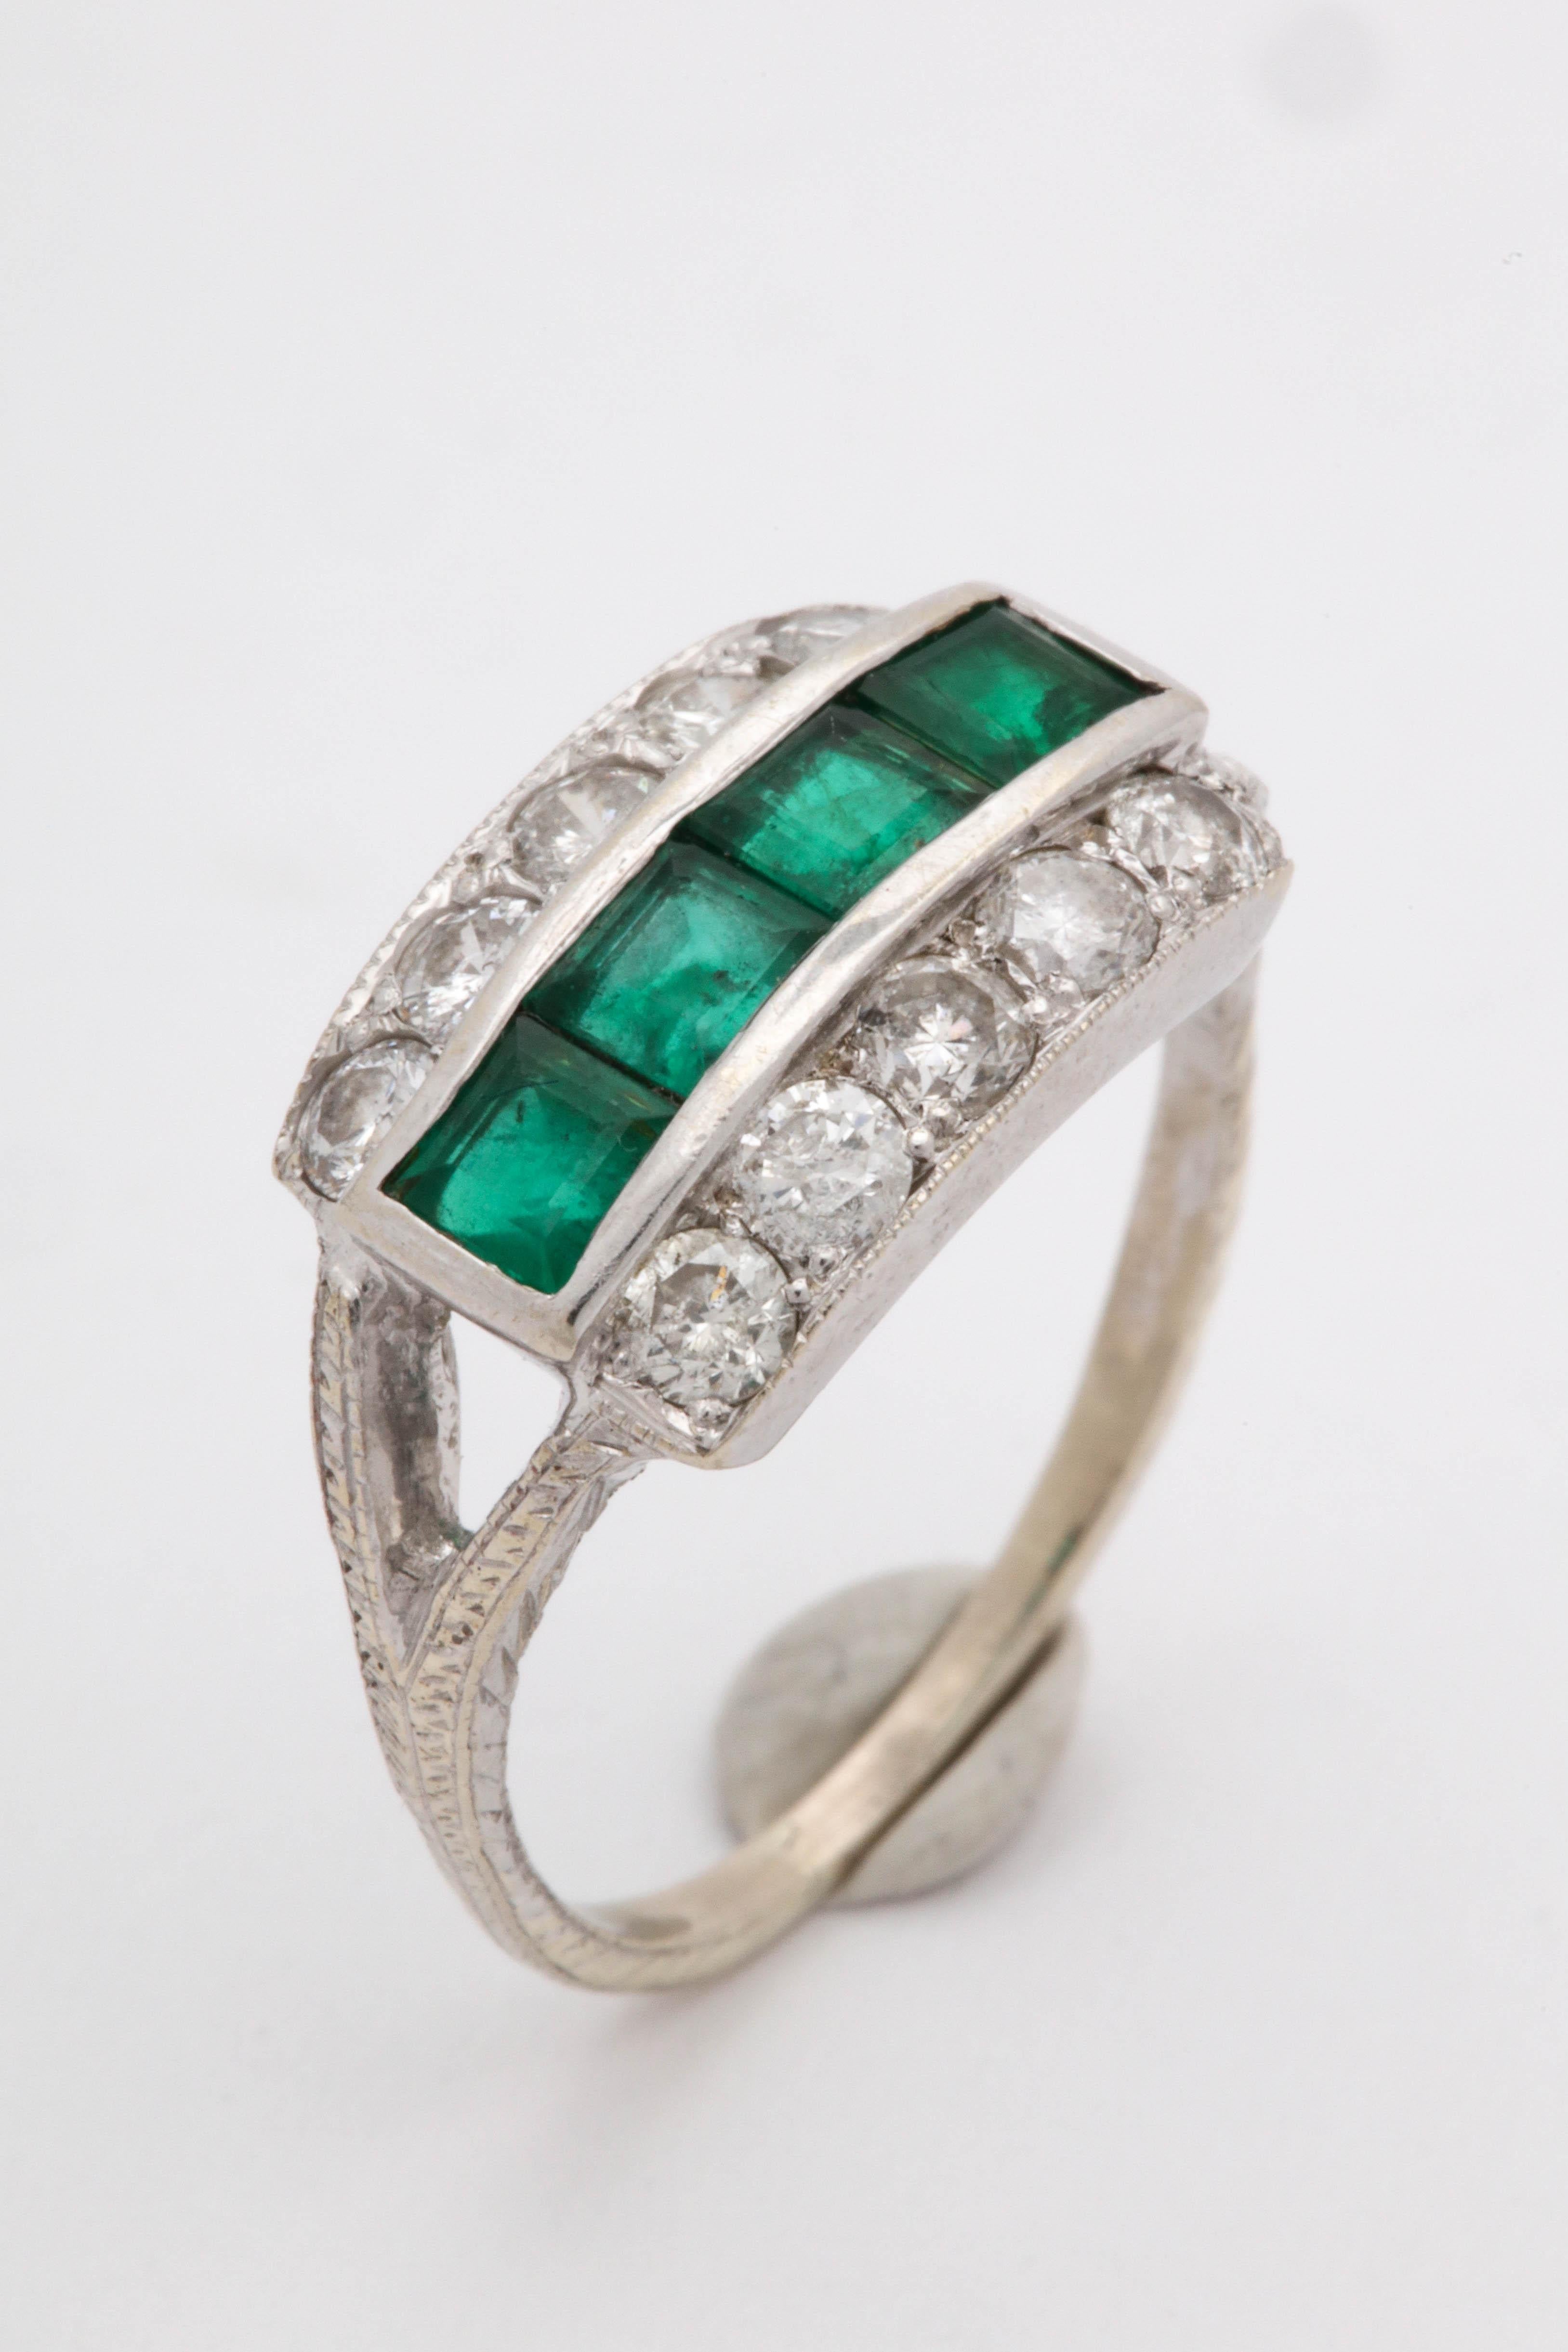 1930s Emerald Cut Emeralds with Diamonds Band Style White Gold Ring 1